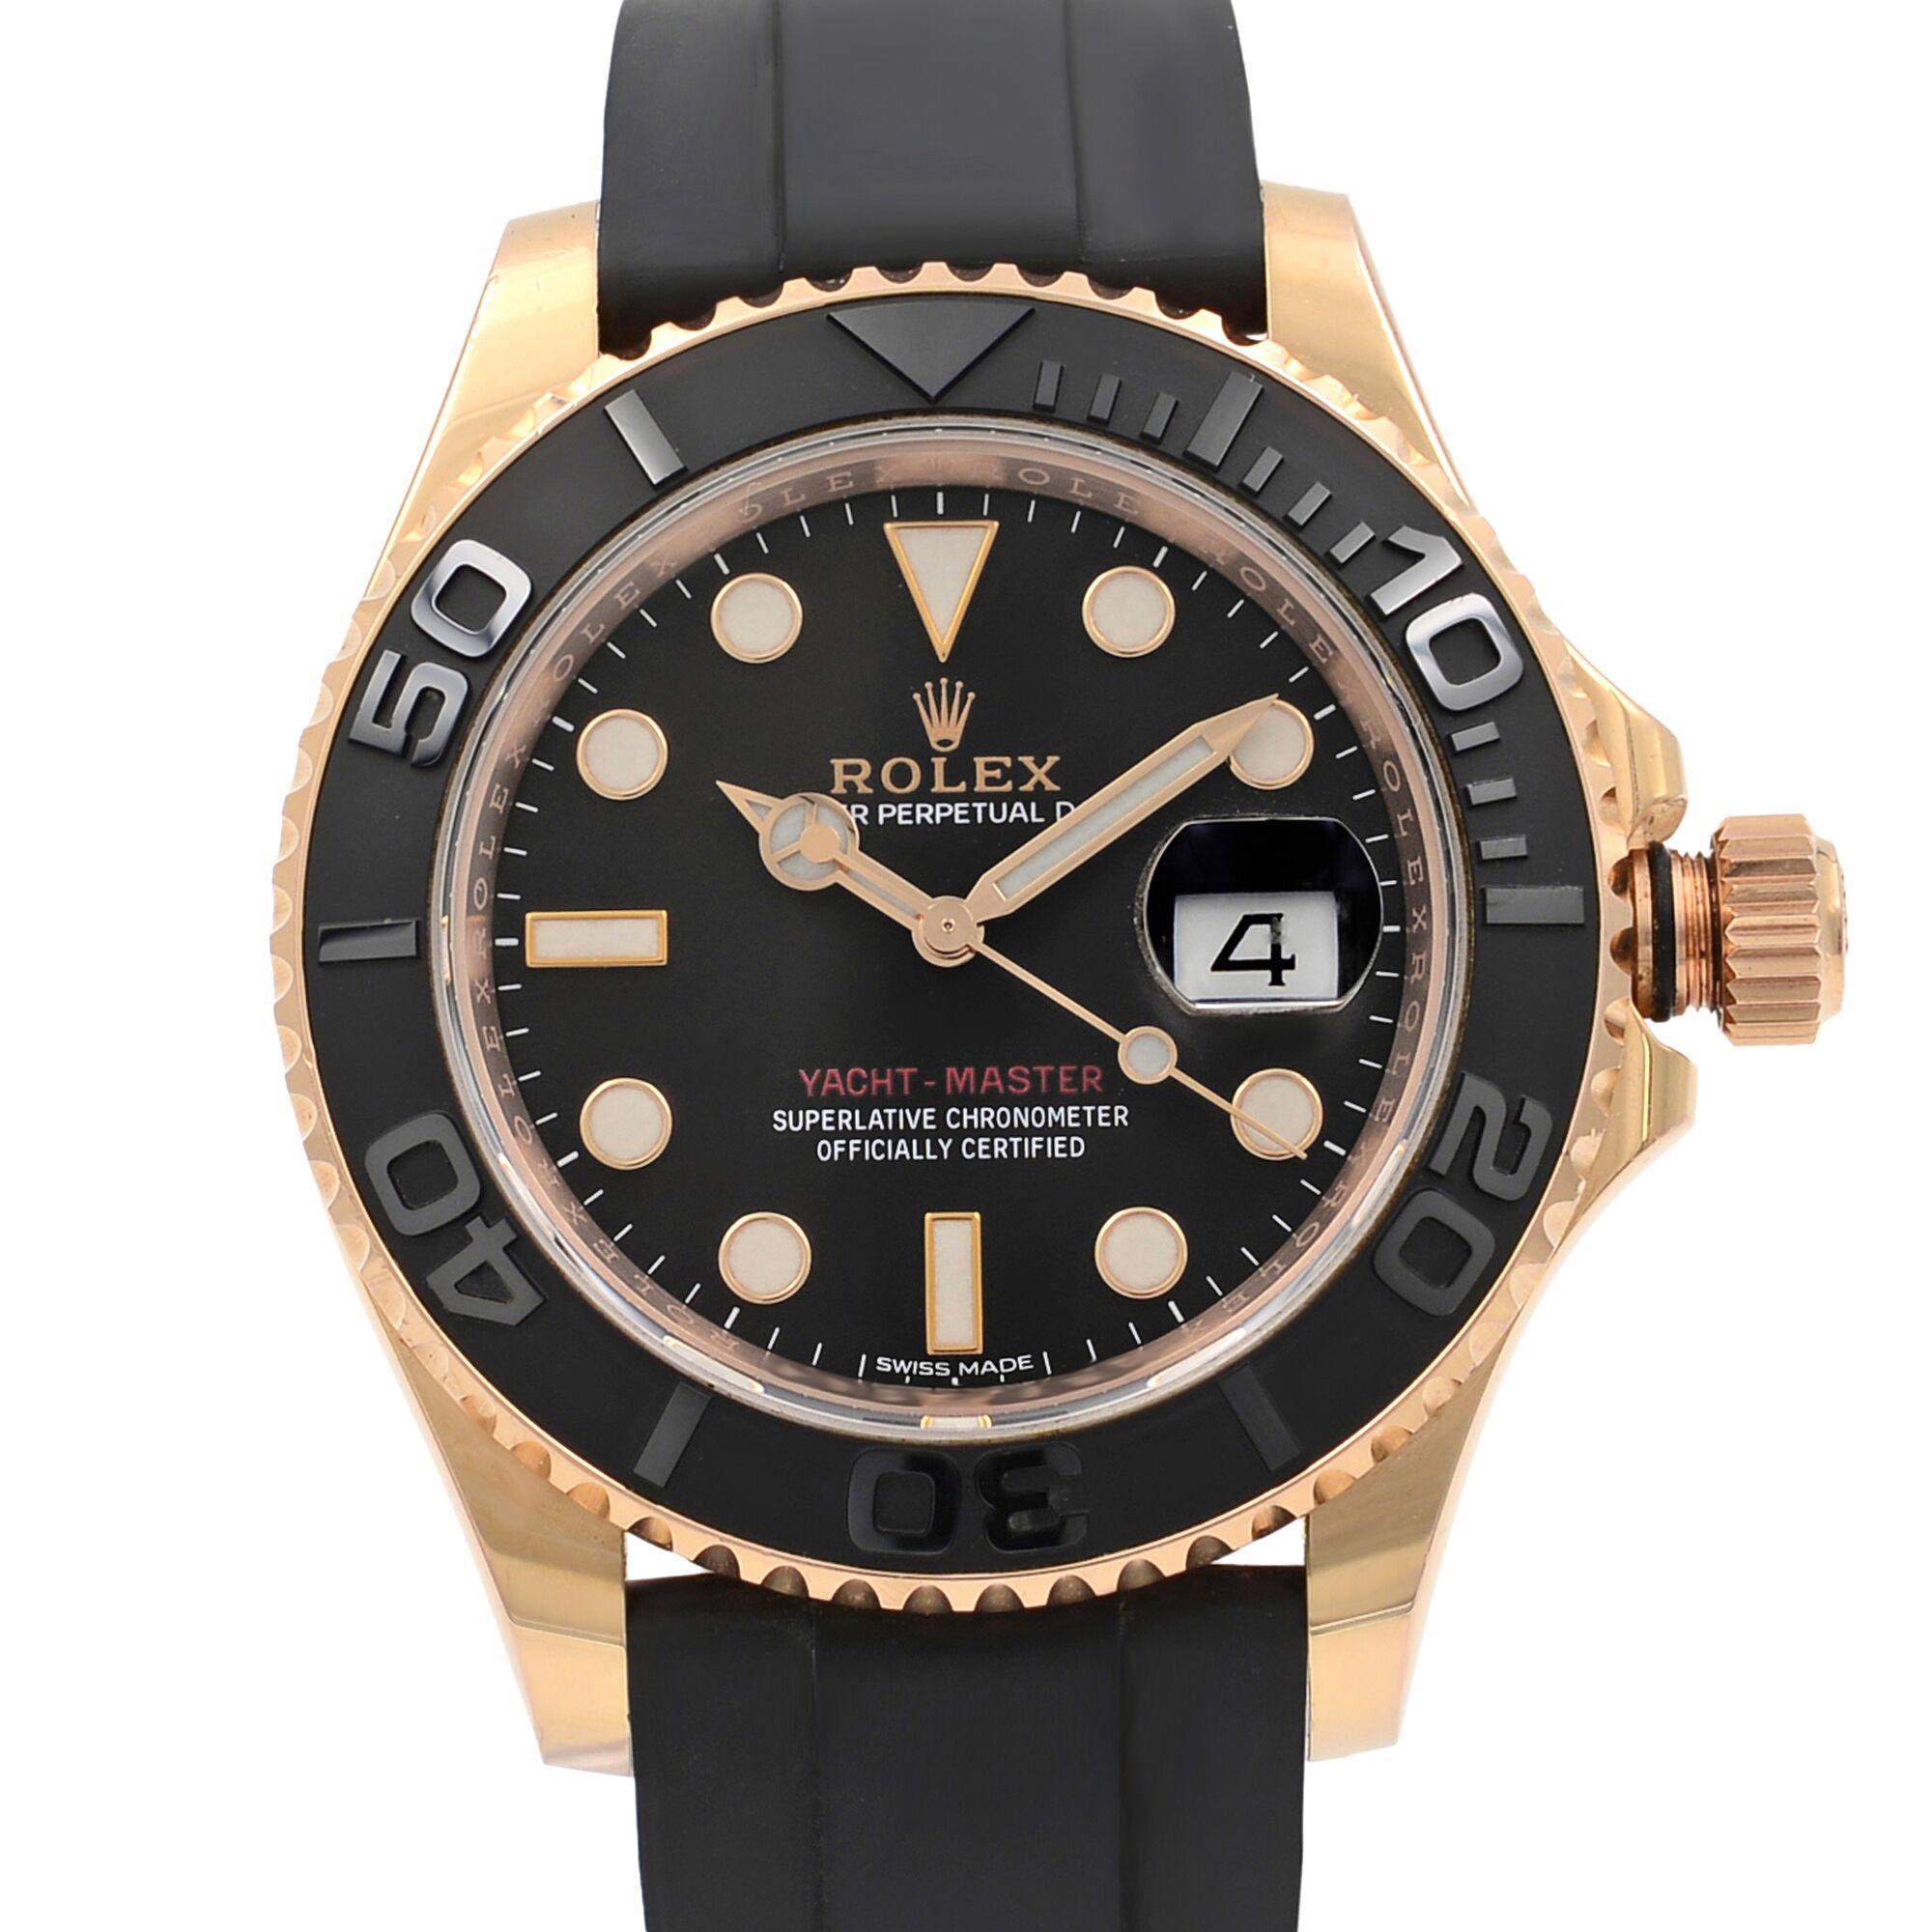 Pre-owned in mint condition. Original Box and Papers are Included. Covered by 3-year Chronostore Warranty. 

General Information
Brand: Rolex
Model Number: 116655
Model: Yacht-Master 116655
Type: Wristwatch
Department: Men
Country/Region of